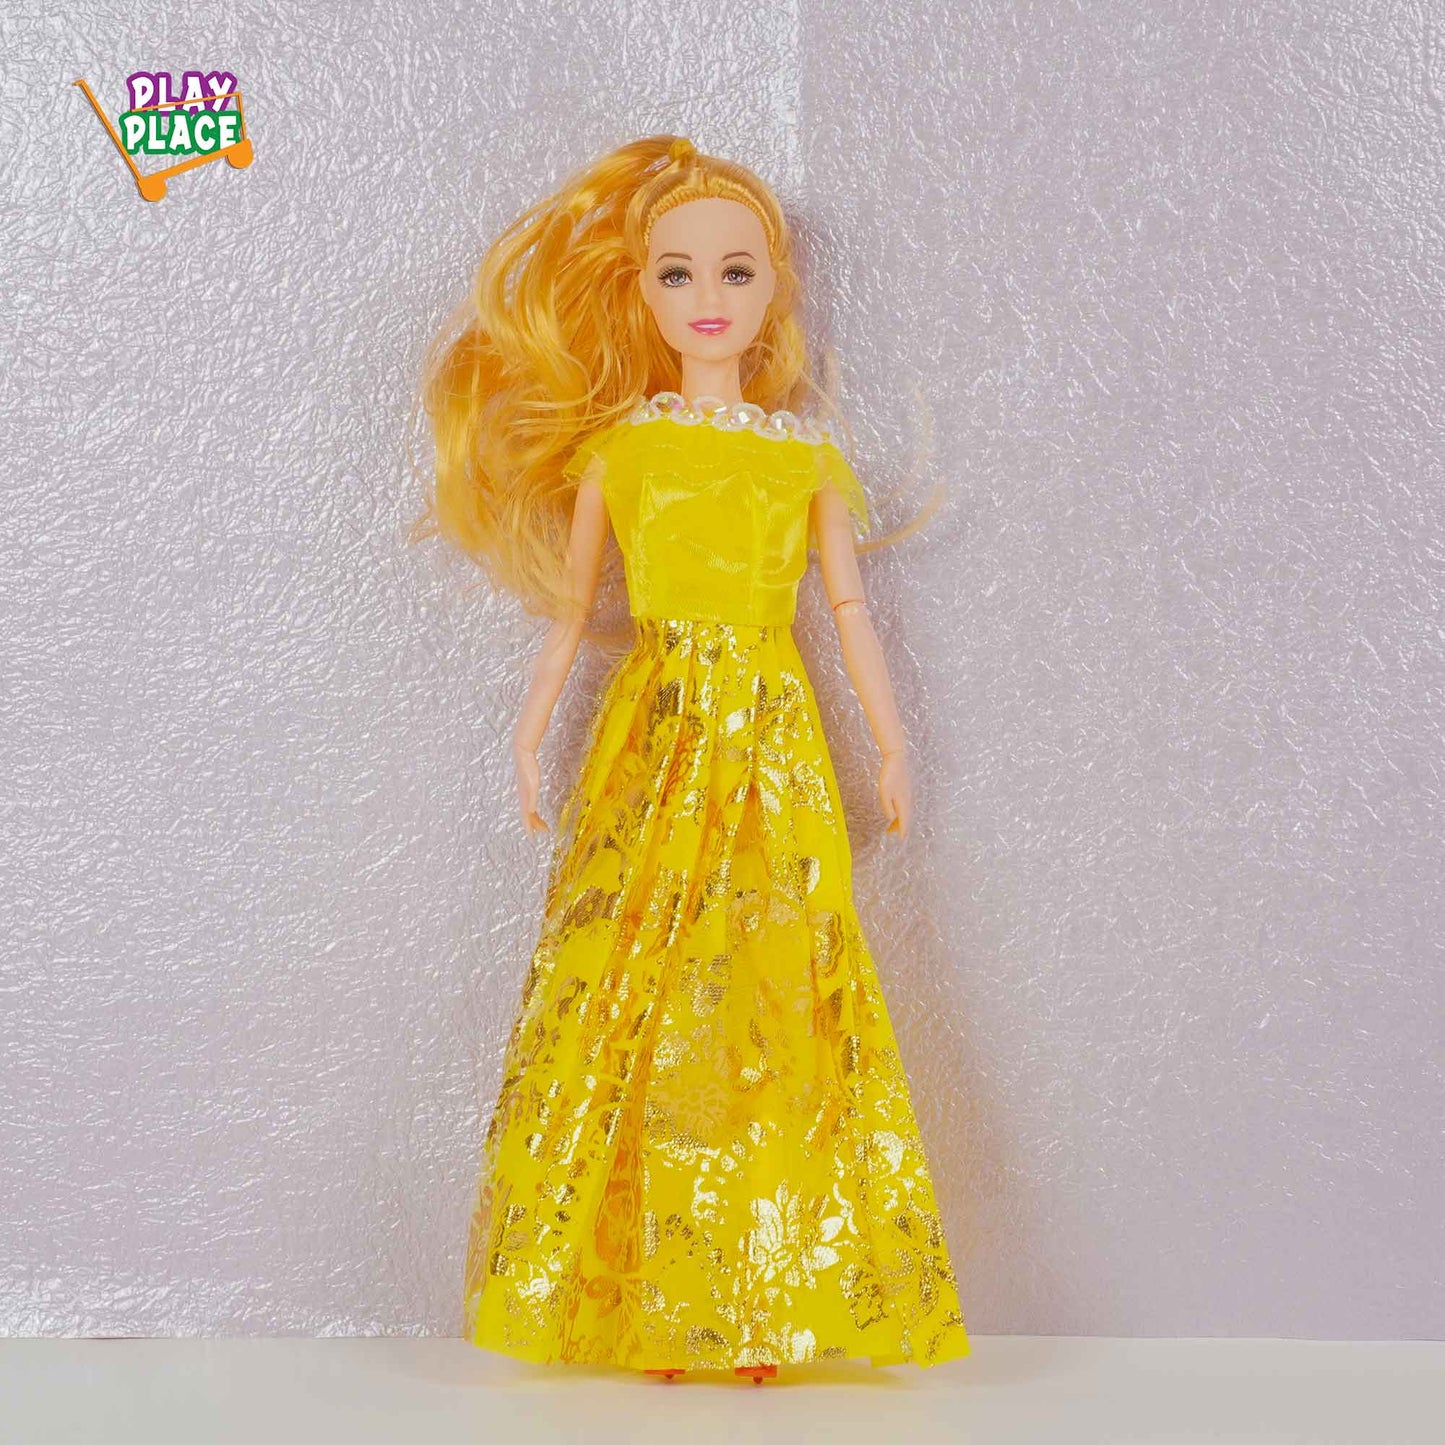 Fashion Girl - Doll with Yellow Dress